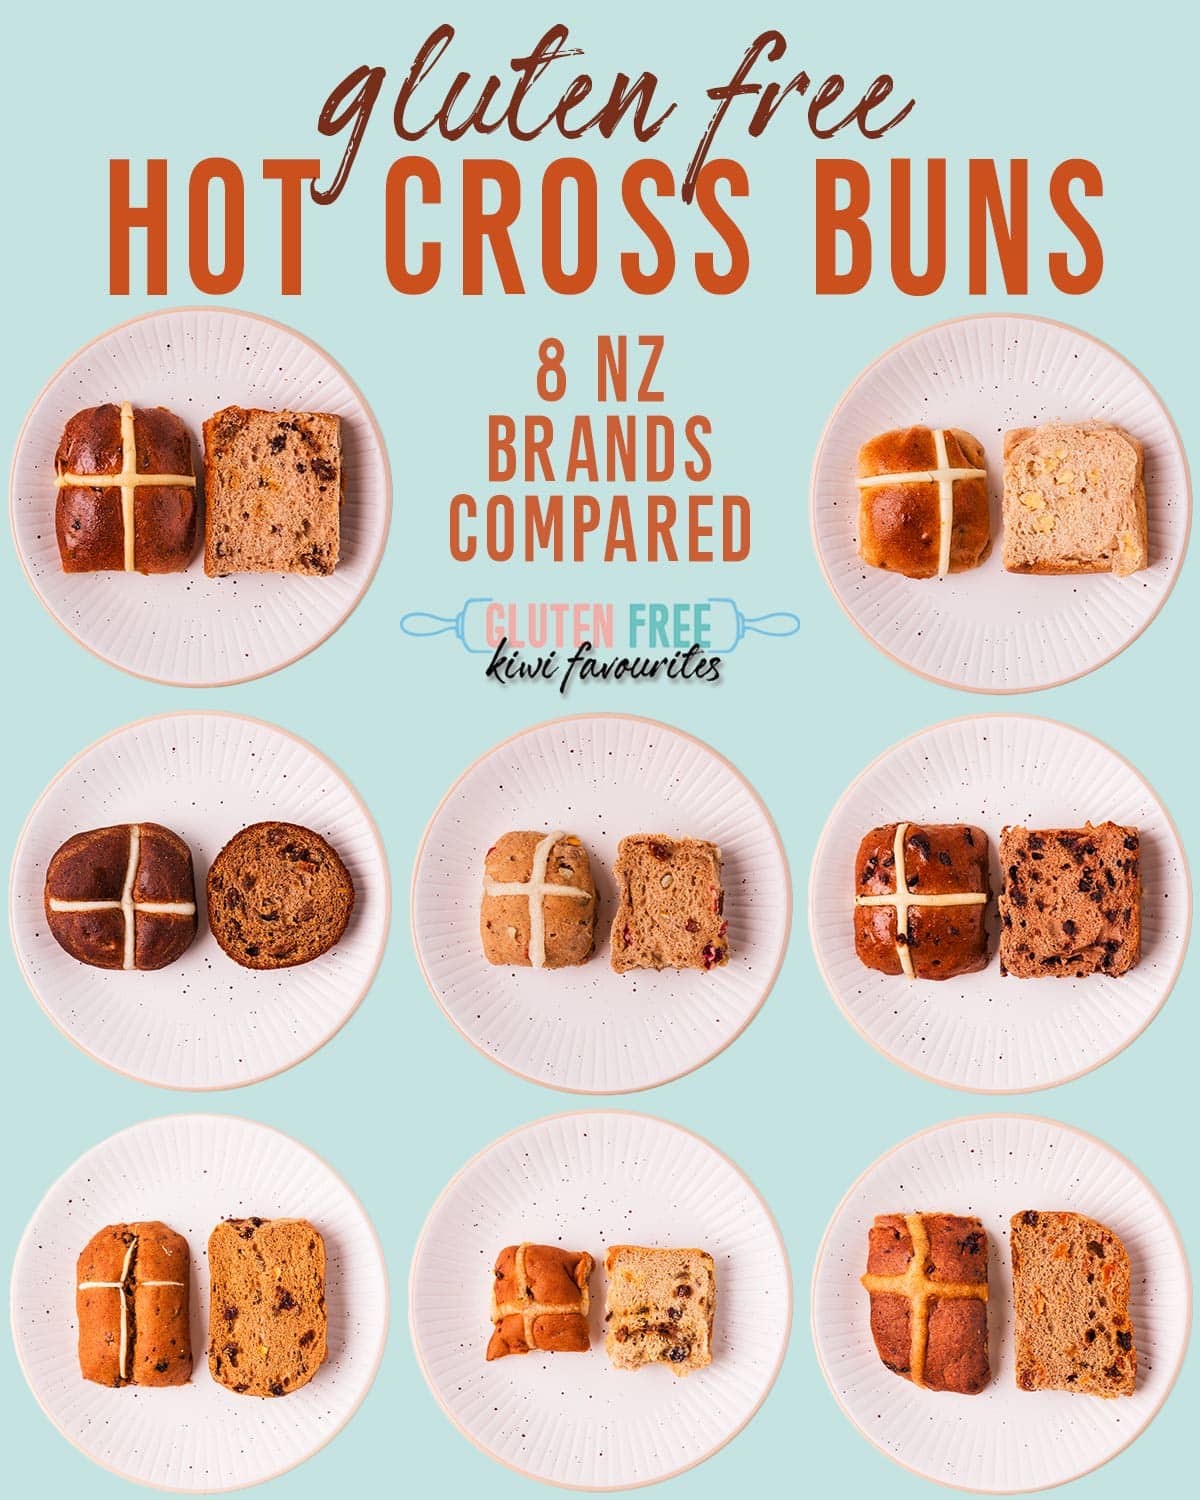 A collage image of 8 grey plates with halved hot cross buns on a mint green background, text overlay reads "gluten free hot cross buns, 8 nz brands compared".